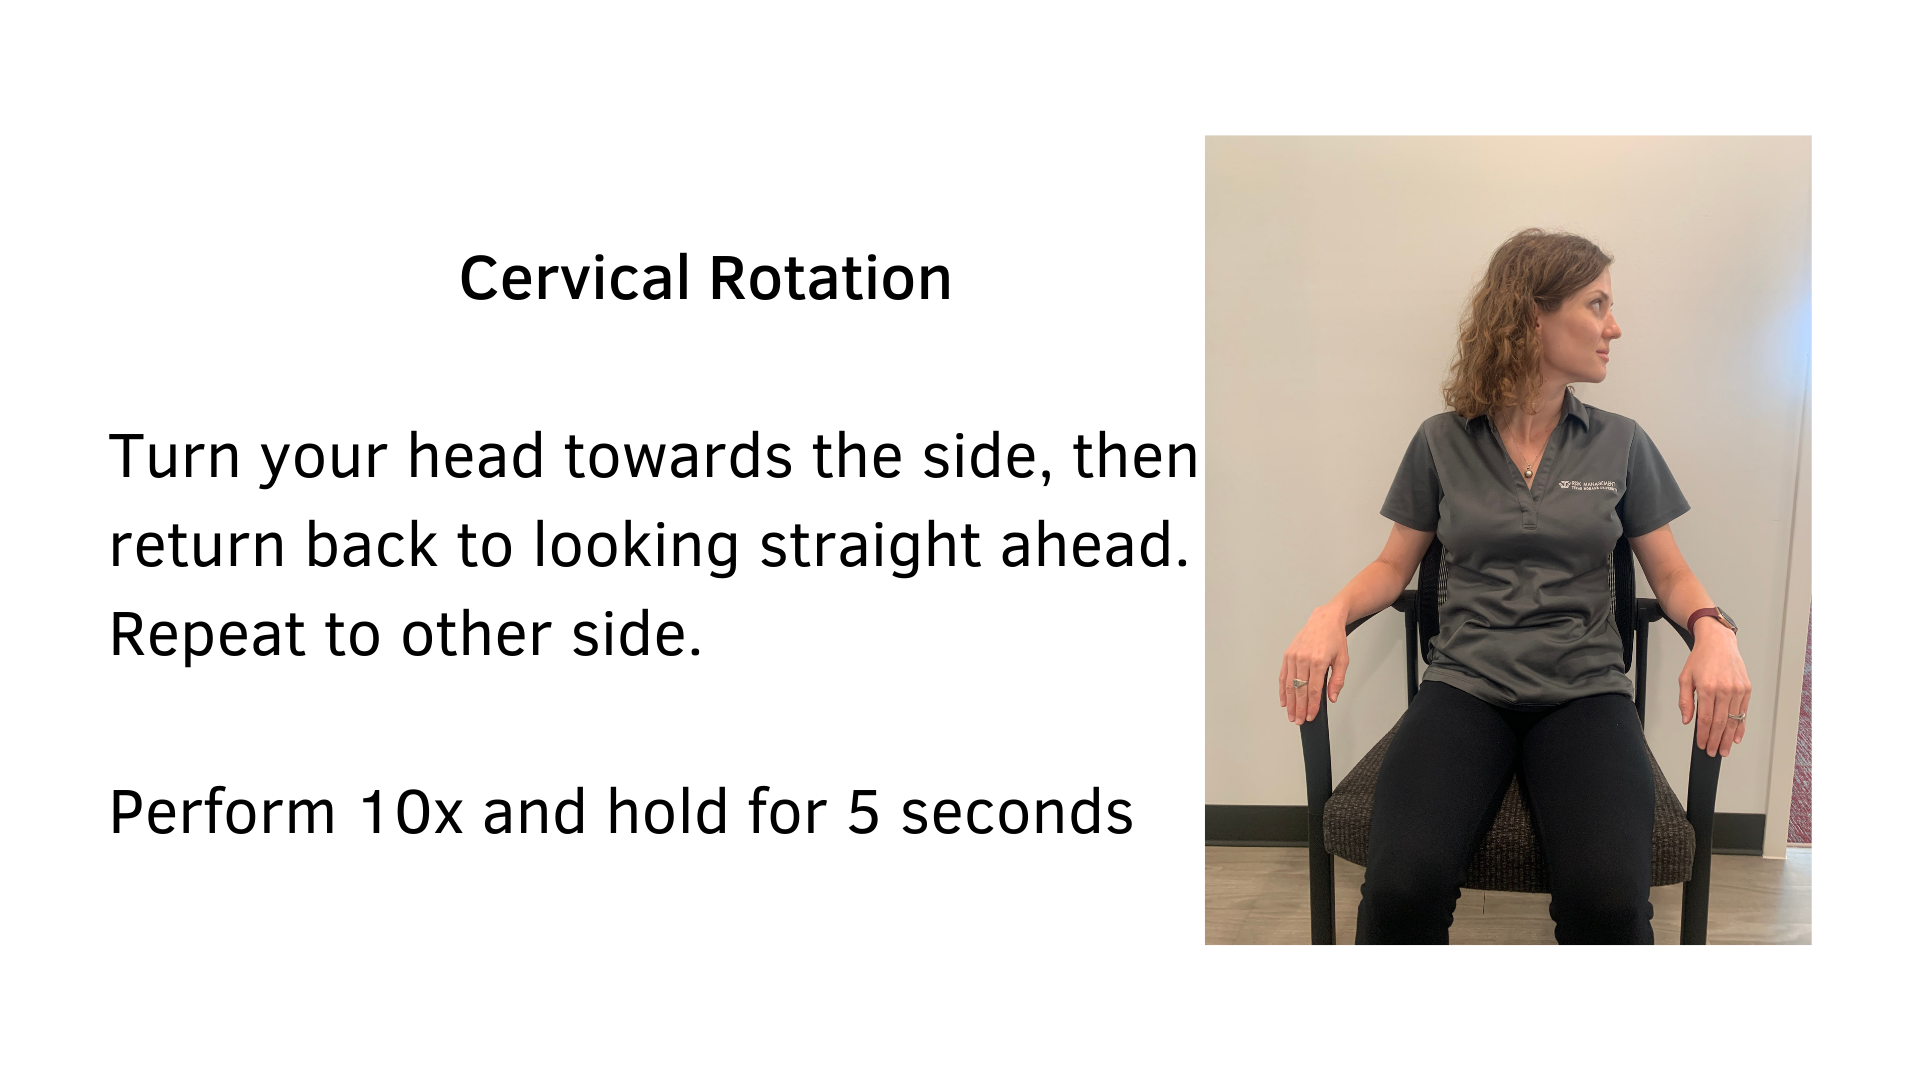 Black text on a white background that reads, "Cervical Rotation: Turn your head towards the side, then return back to looking straight ahead. Repeat to the other side. Perform 10x and hold for 5 seconds". A picture of a woman seated in chair performing the stretch is featured.